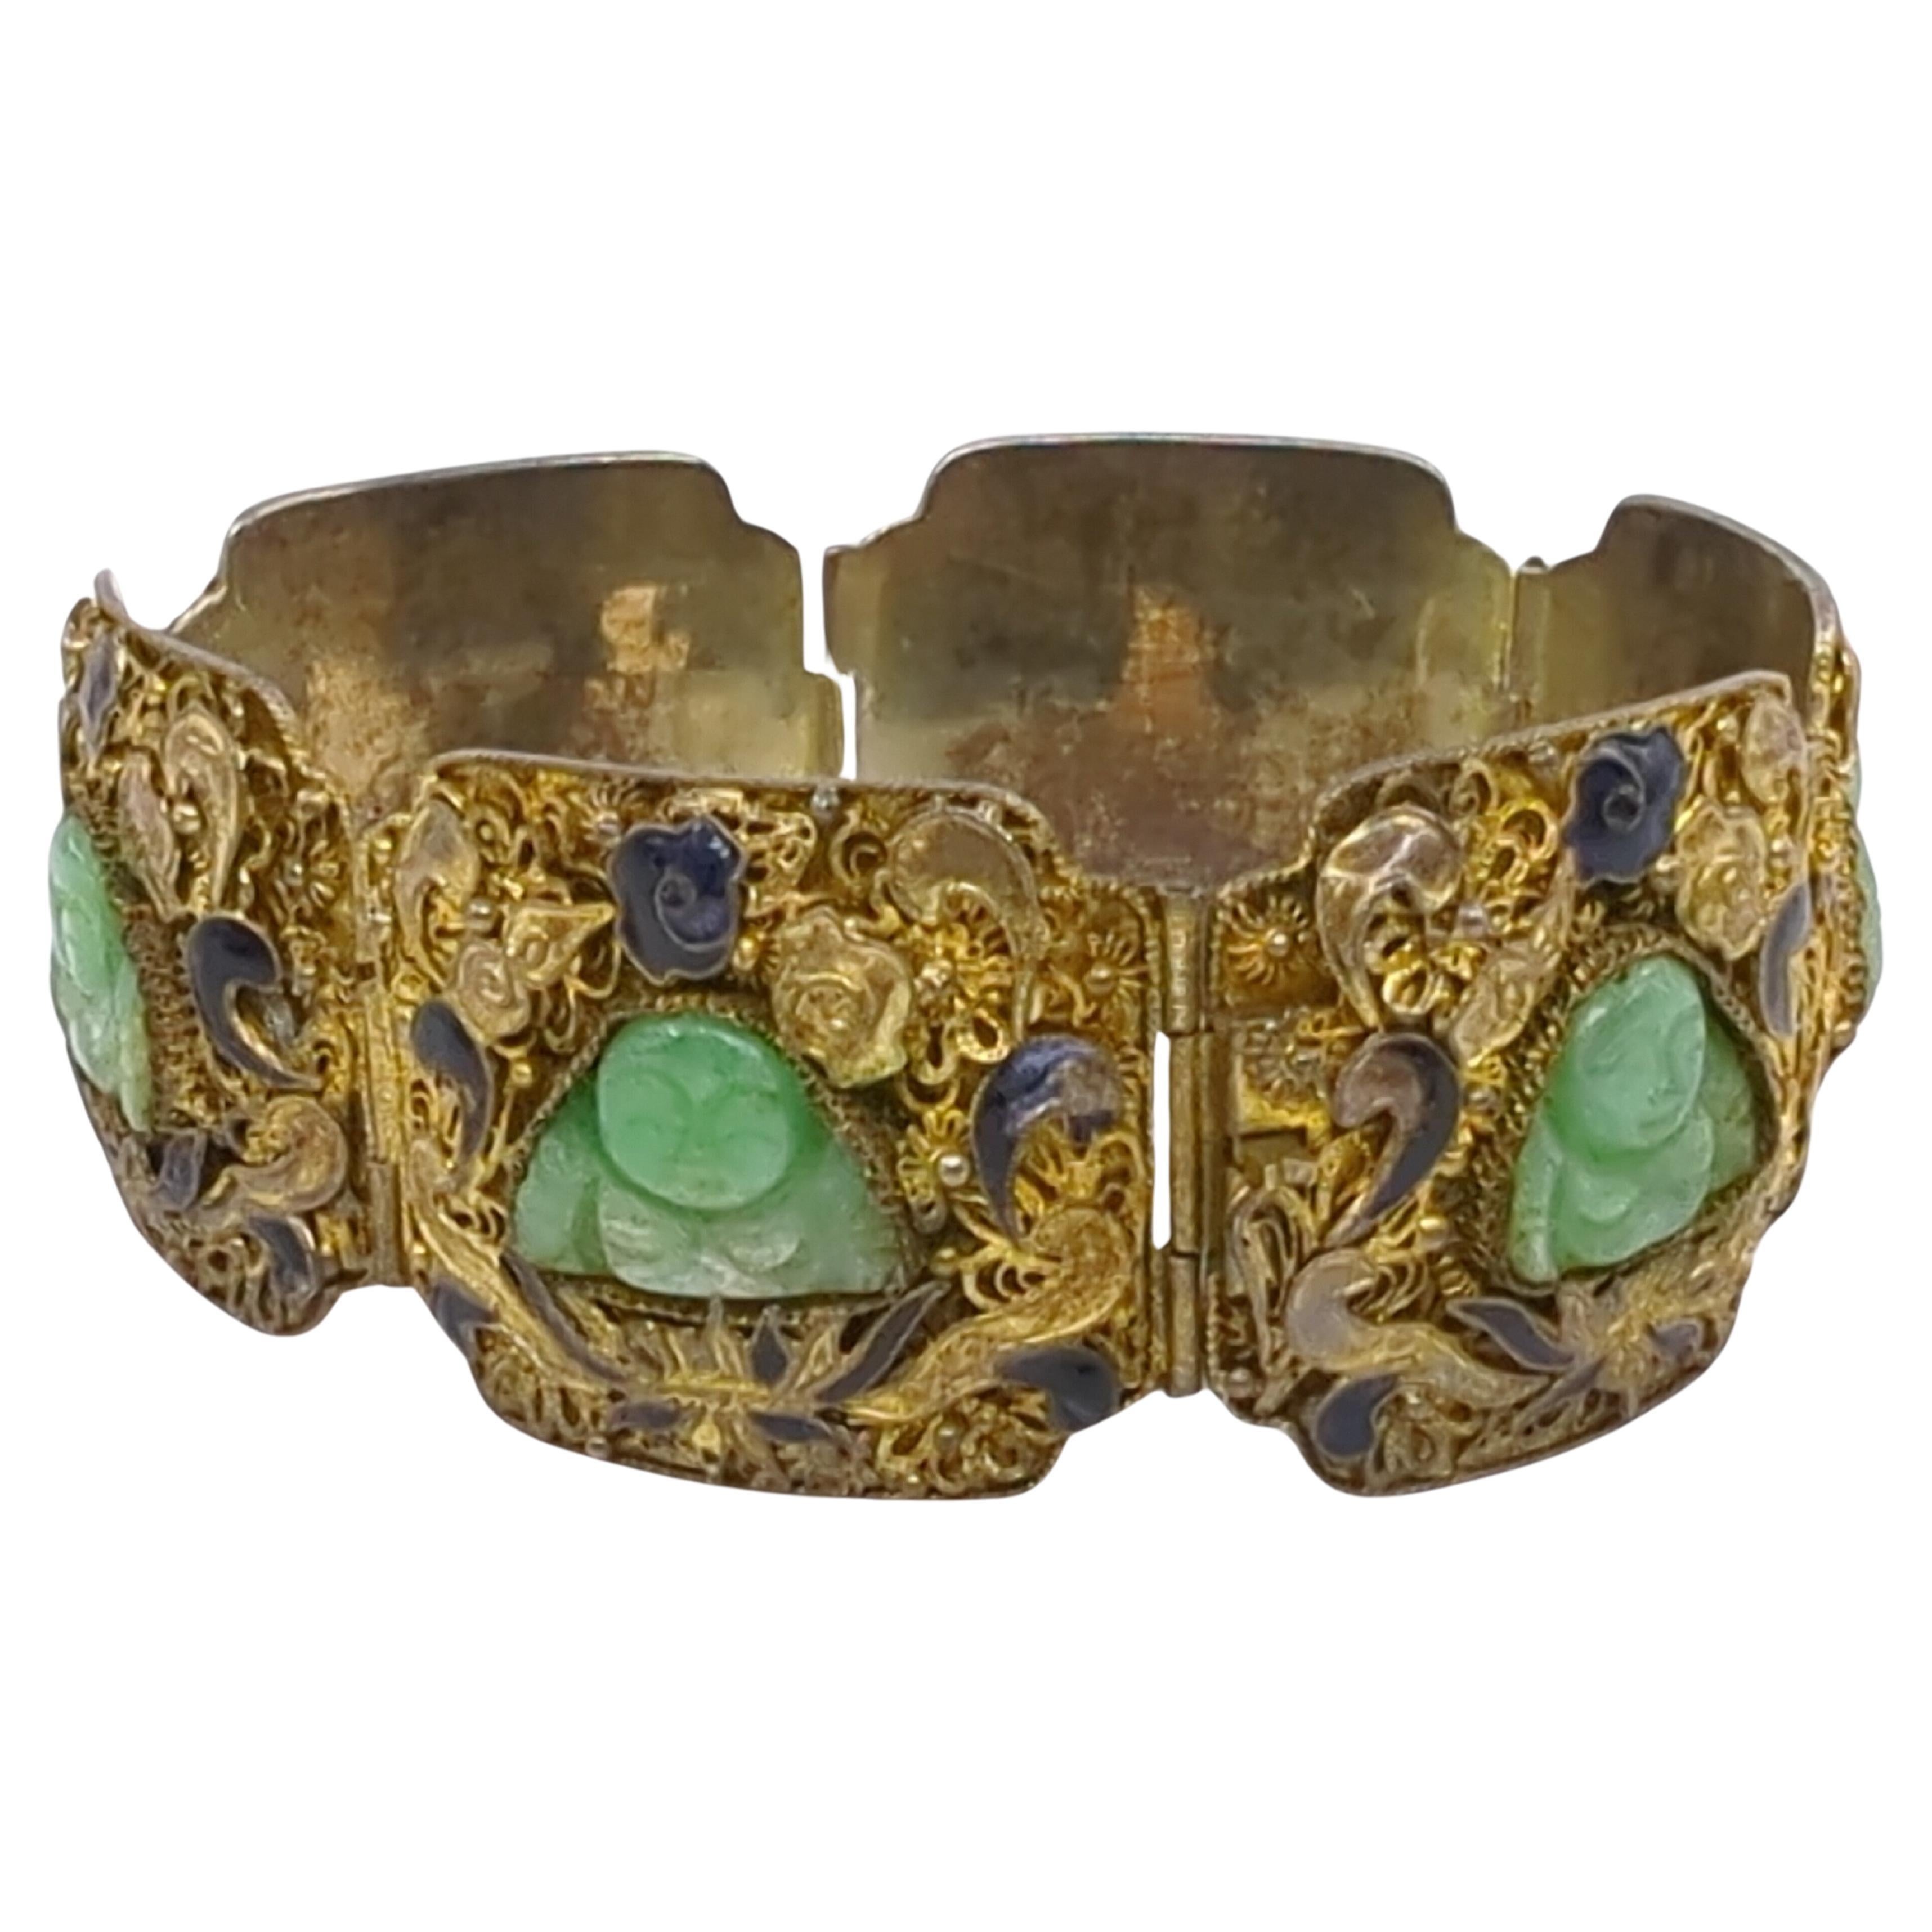 This exquisite mid-20th-century bracelet is a masterful blend of craftsmanship and symbolism, featuring six links of gold-plated silver filigree, each inset with a green jade seated Buddha. The Buddhas, carved with smiling faces, serve as the focal